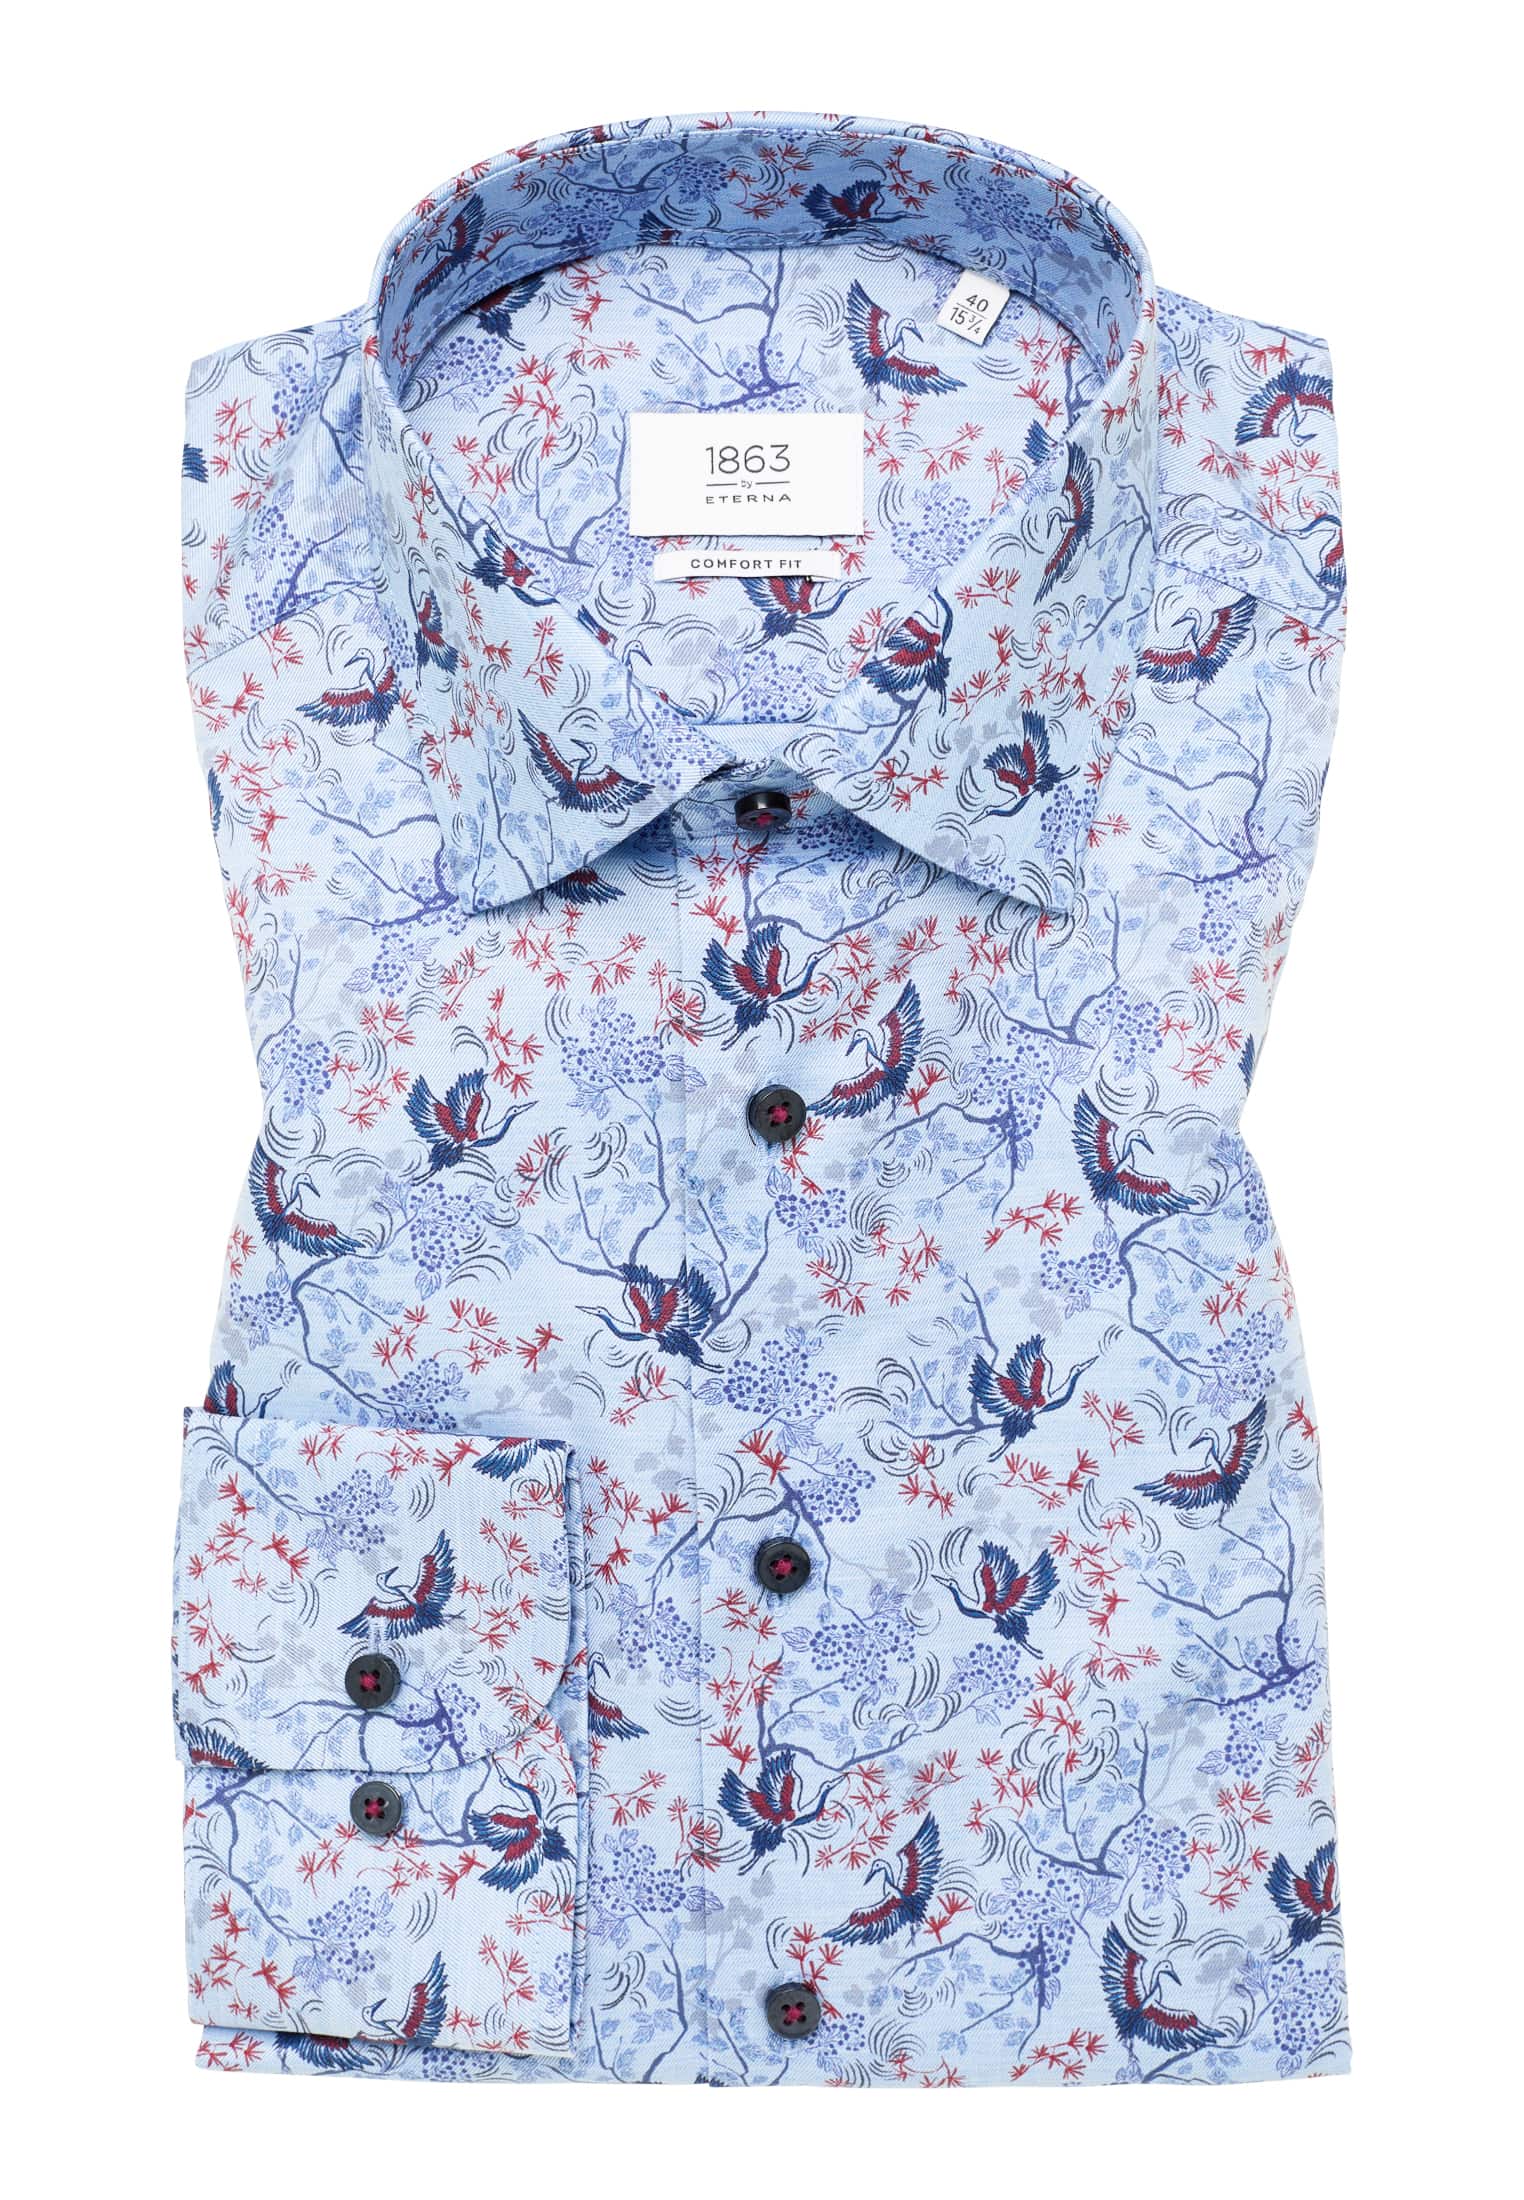 COMFORT FIT Shirt in blue printed